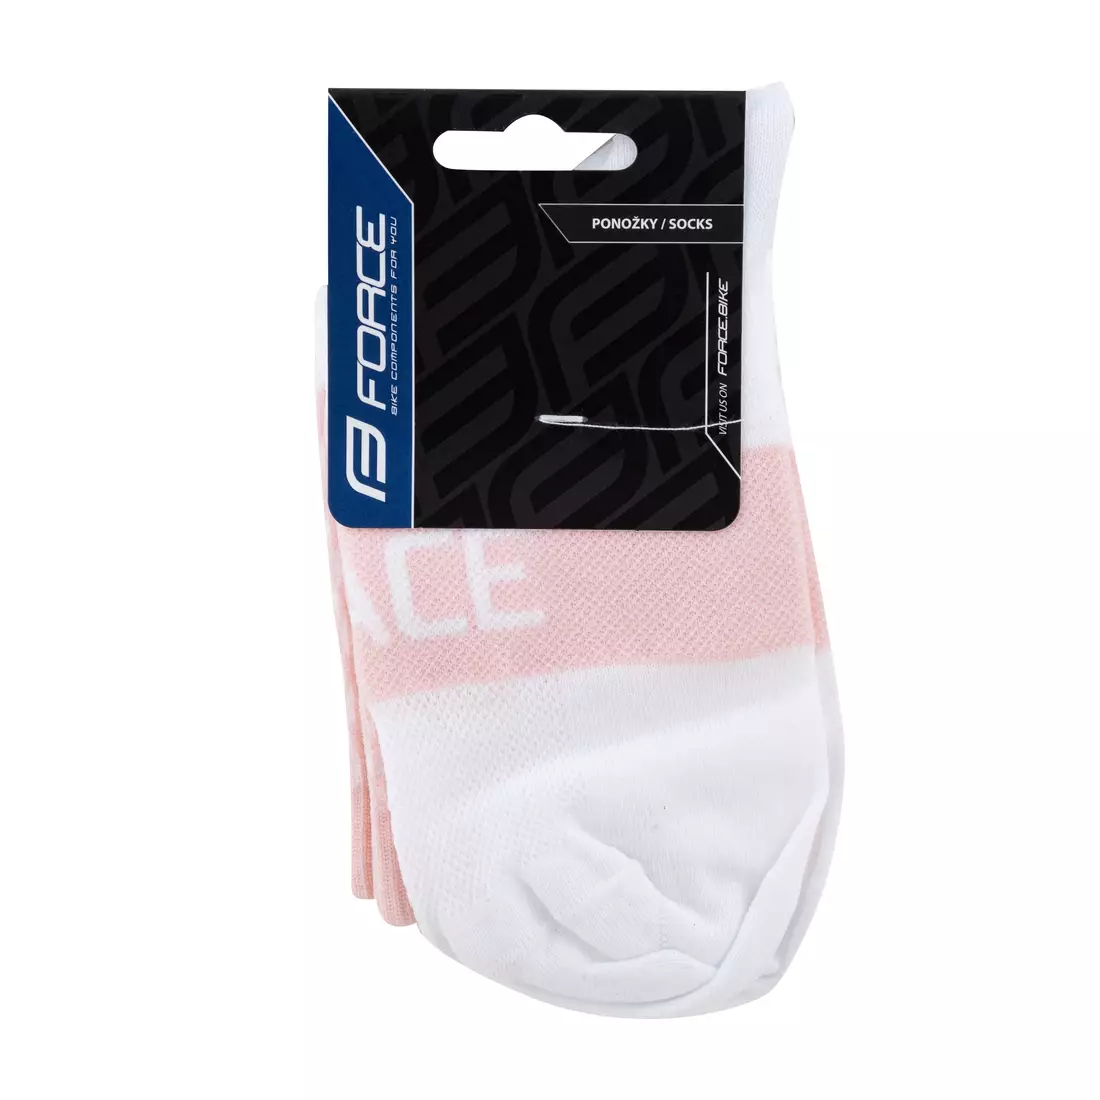 FORCE Cycling socks / sport socks TRACE, pink and white, 900894